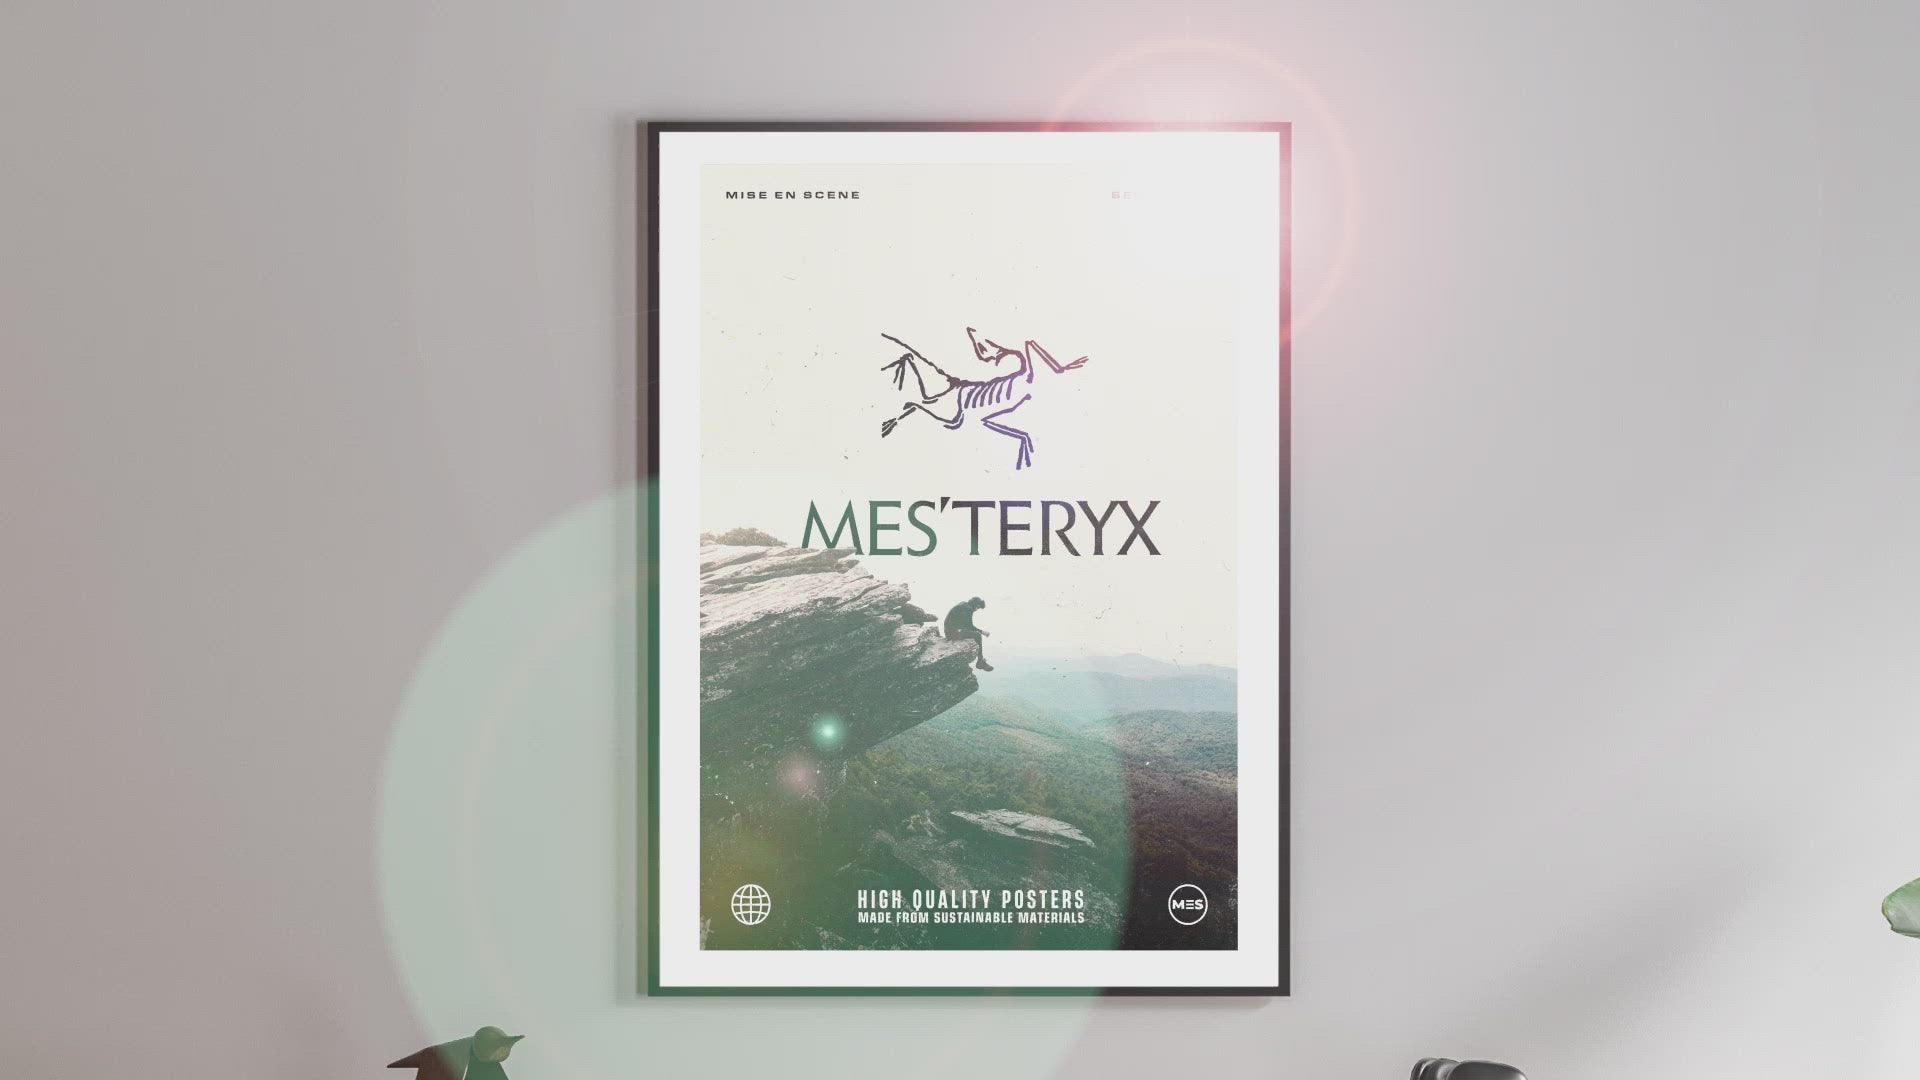 Premium & Sustainable Arc'teryx Poster Print. Hand crafted in the UK from the highest quality paper, created with sustainable FSC paper. Texturised inks, brings the poster to life. Available to purchase with a Polcore Recycled Plastic Frame with Perspex screening to let your print do the talking. 